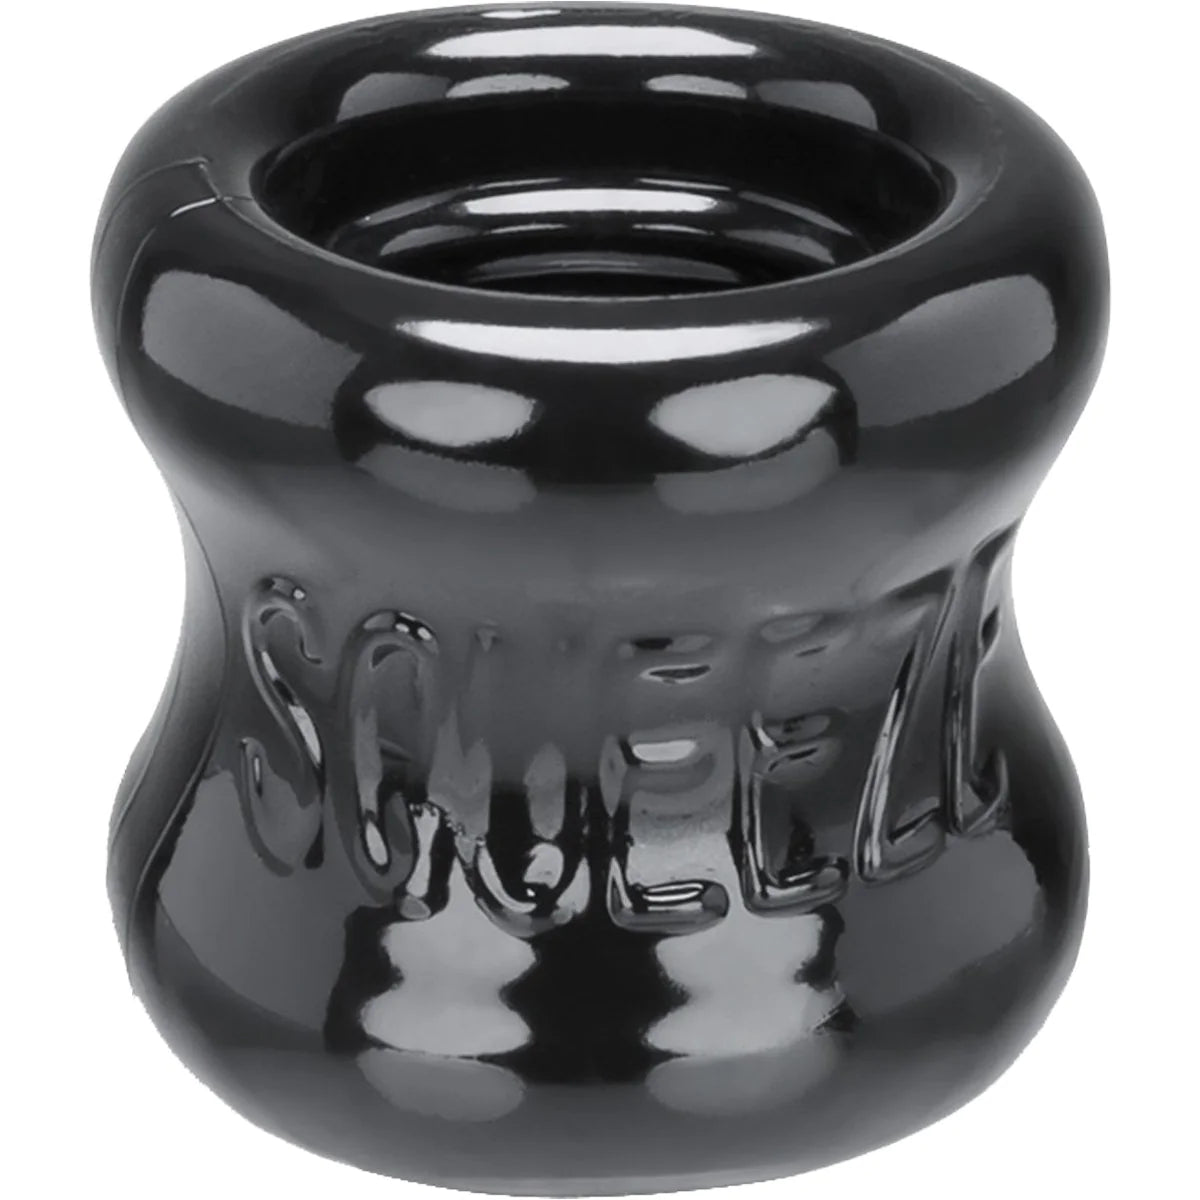 The Oxballs Squeeze, a hollow cylindrical toy made of black rubber. The word squeeze is subtly engraved on the outside of the toy, and some slight texture can be seen on the inside of the toy.